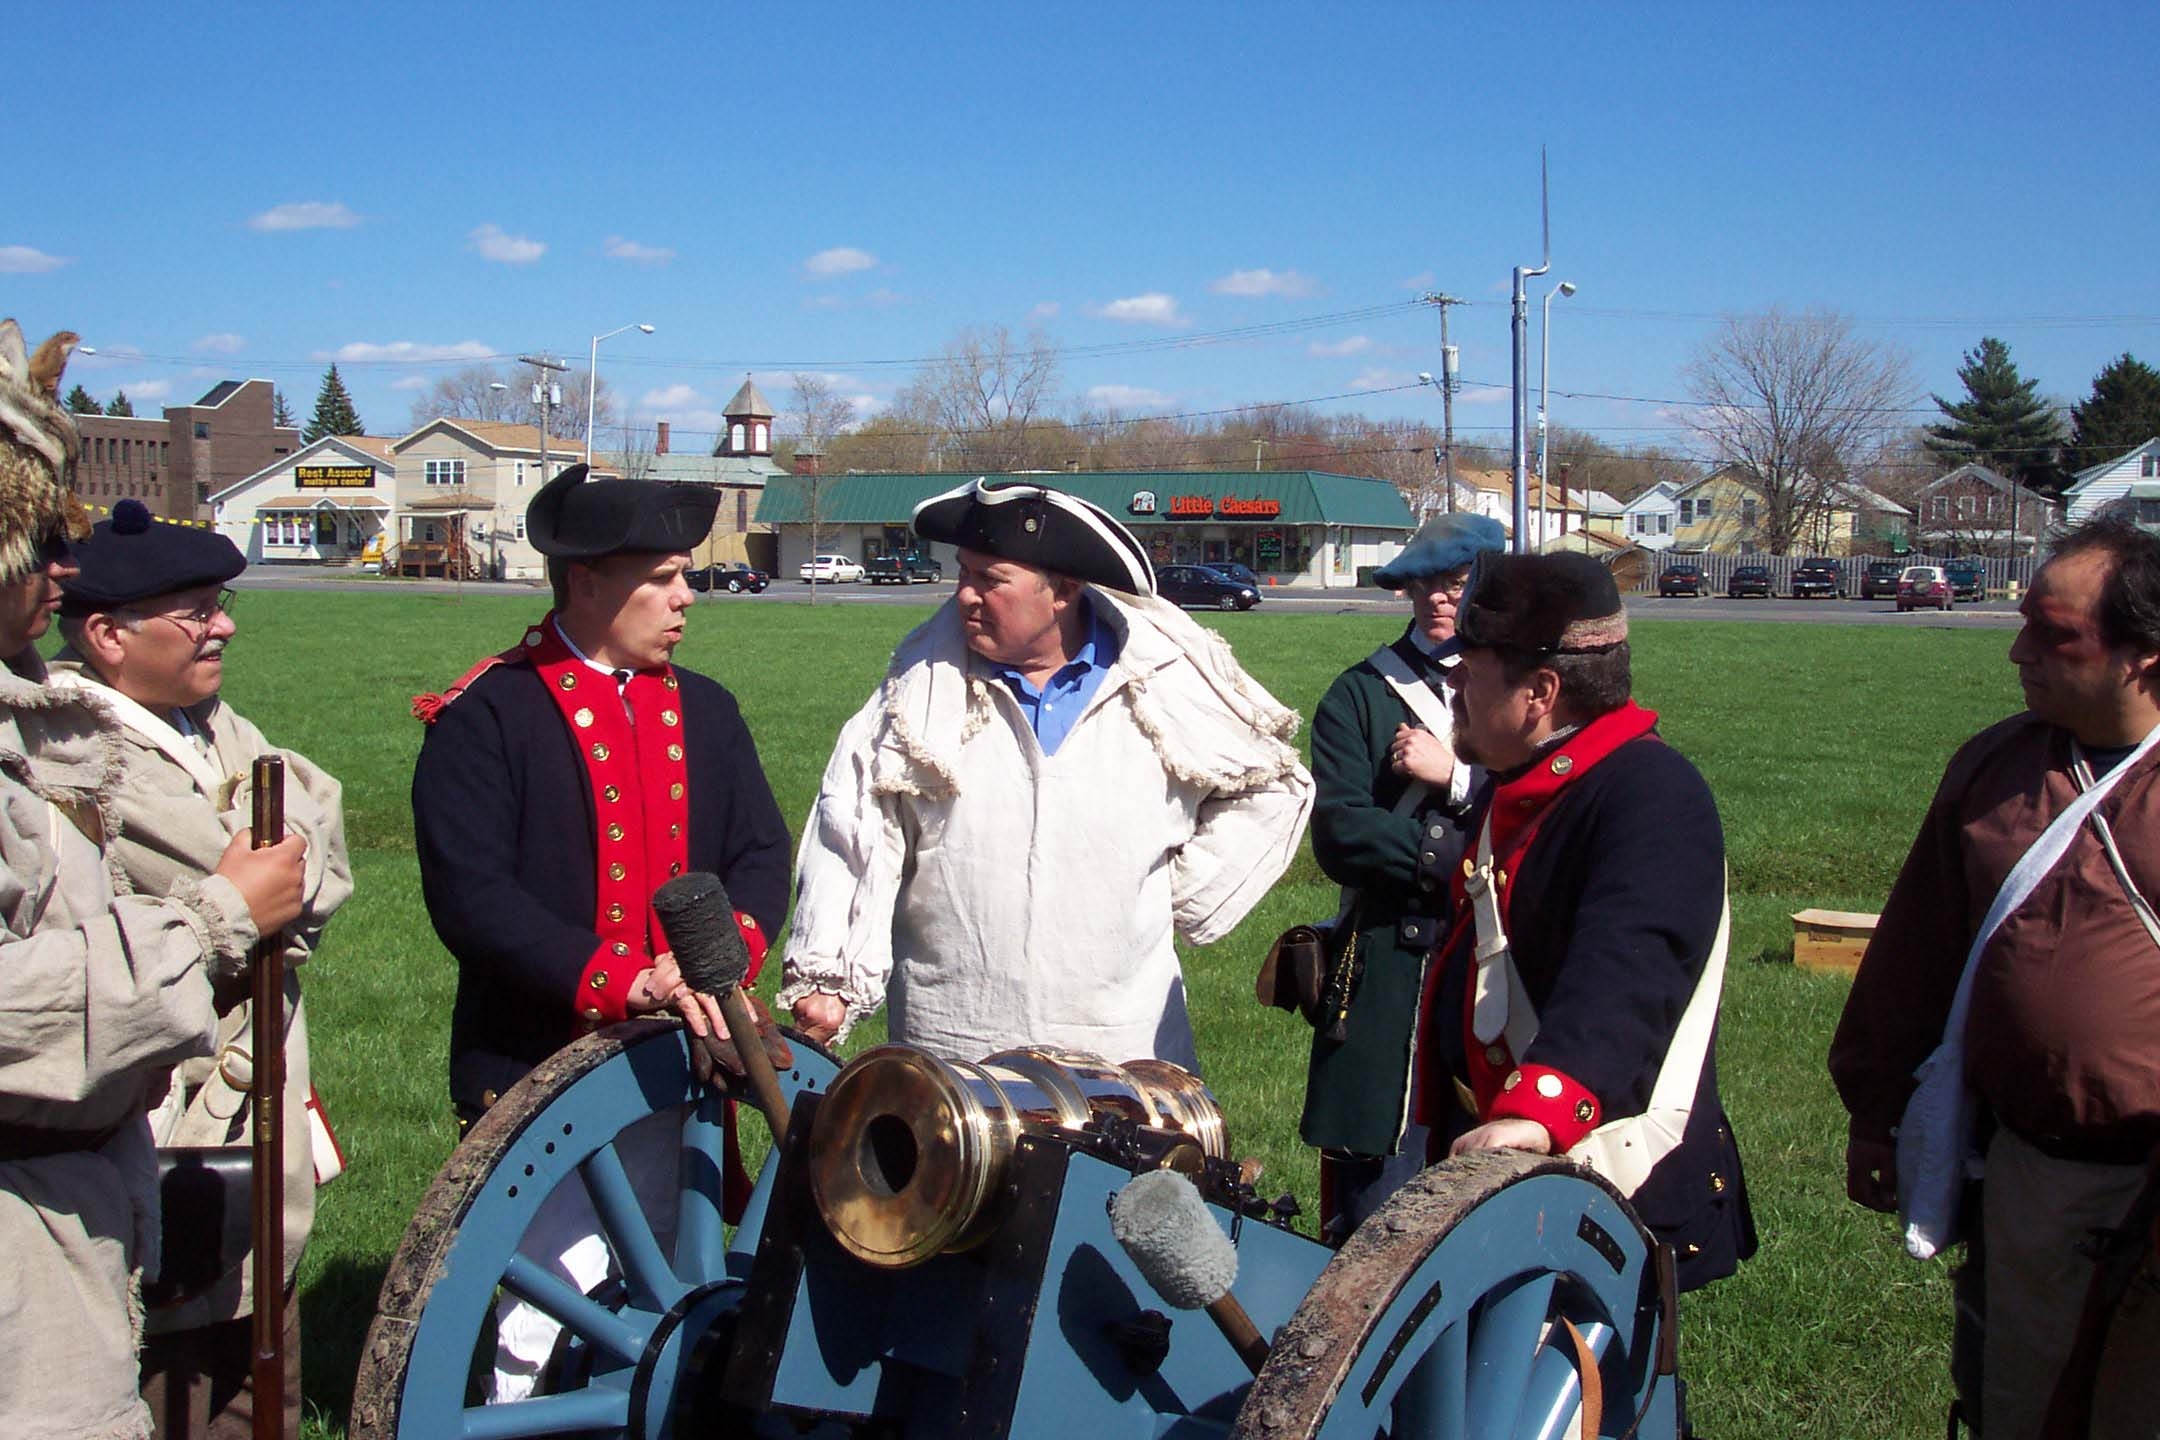 several men stand near a small cannon in 18th century clothing.